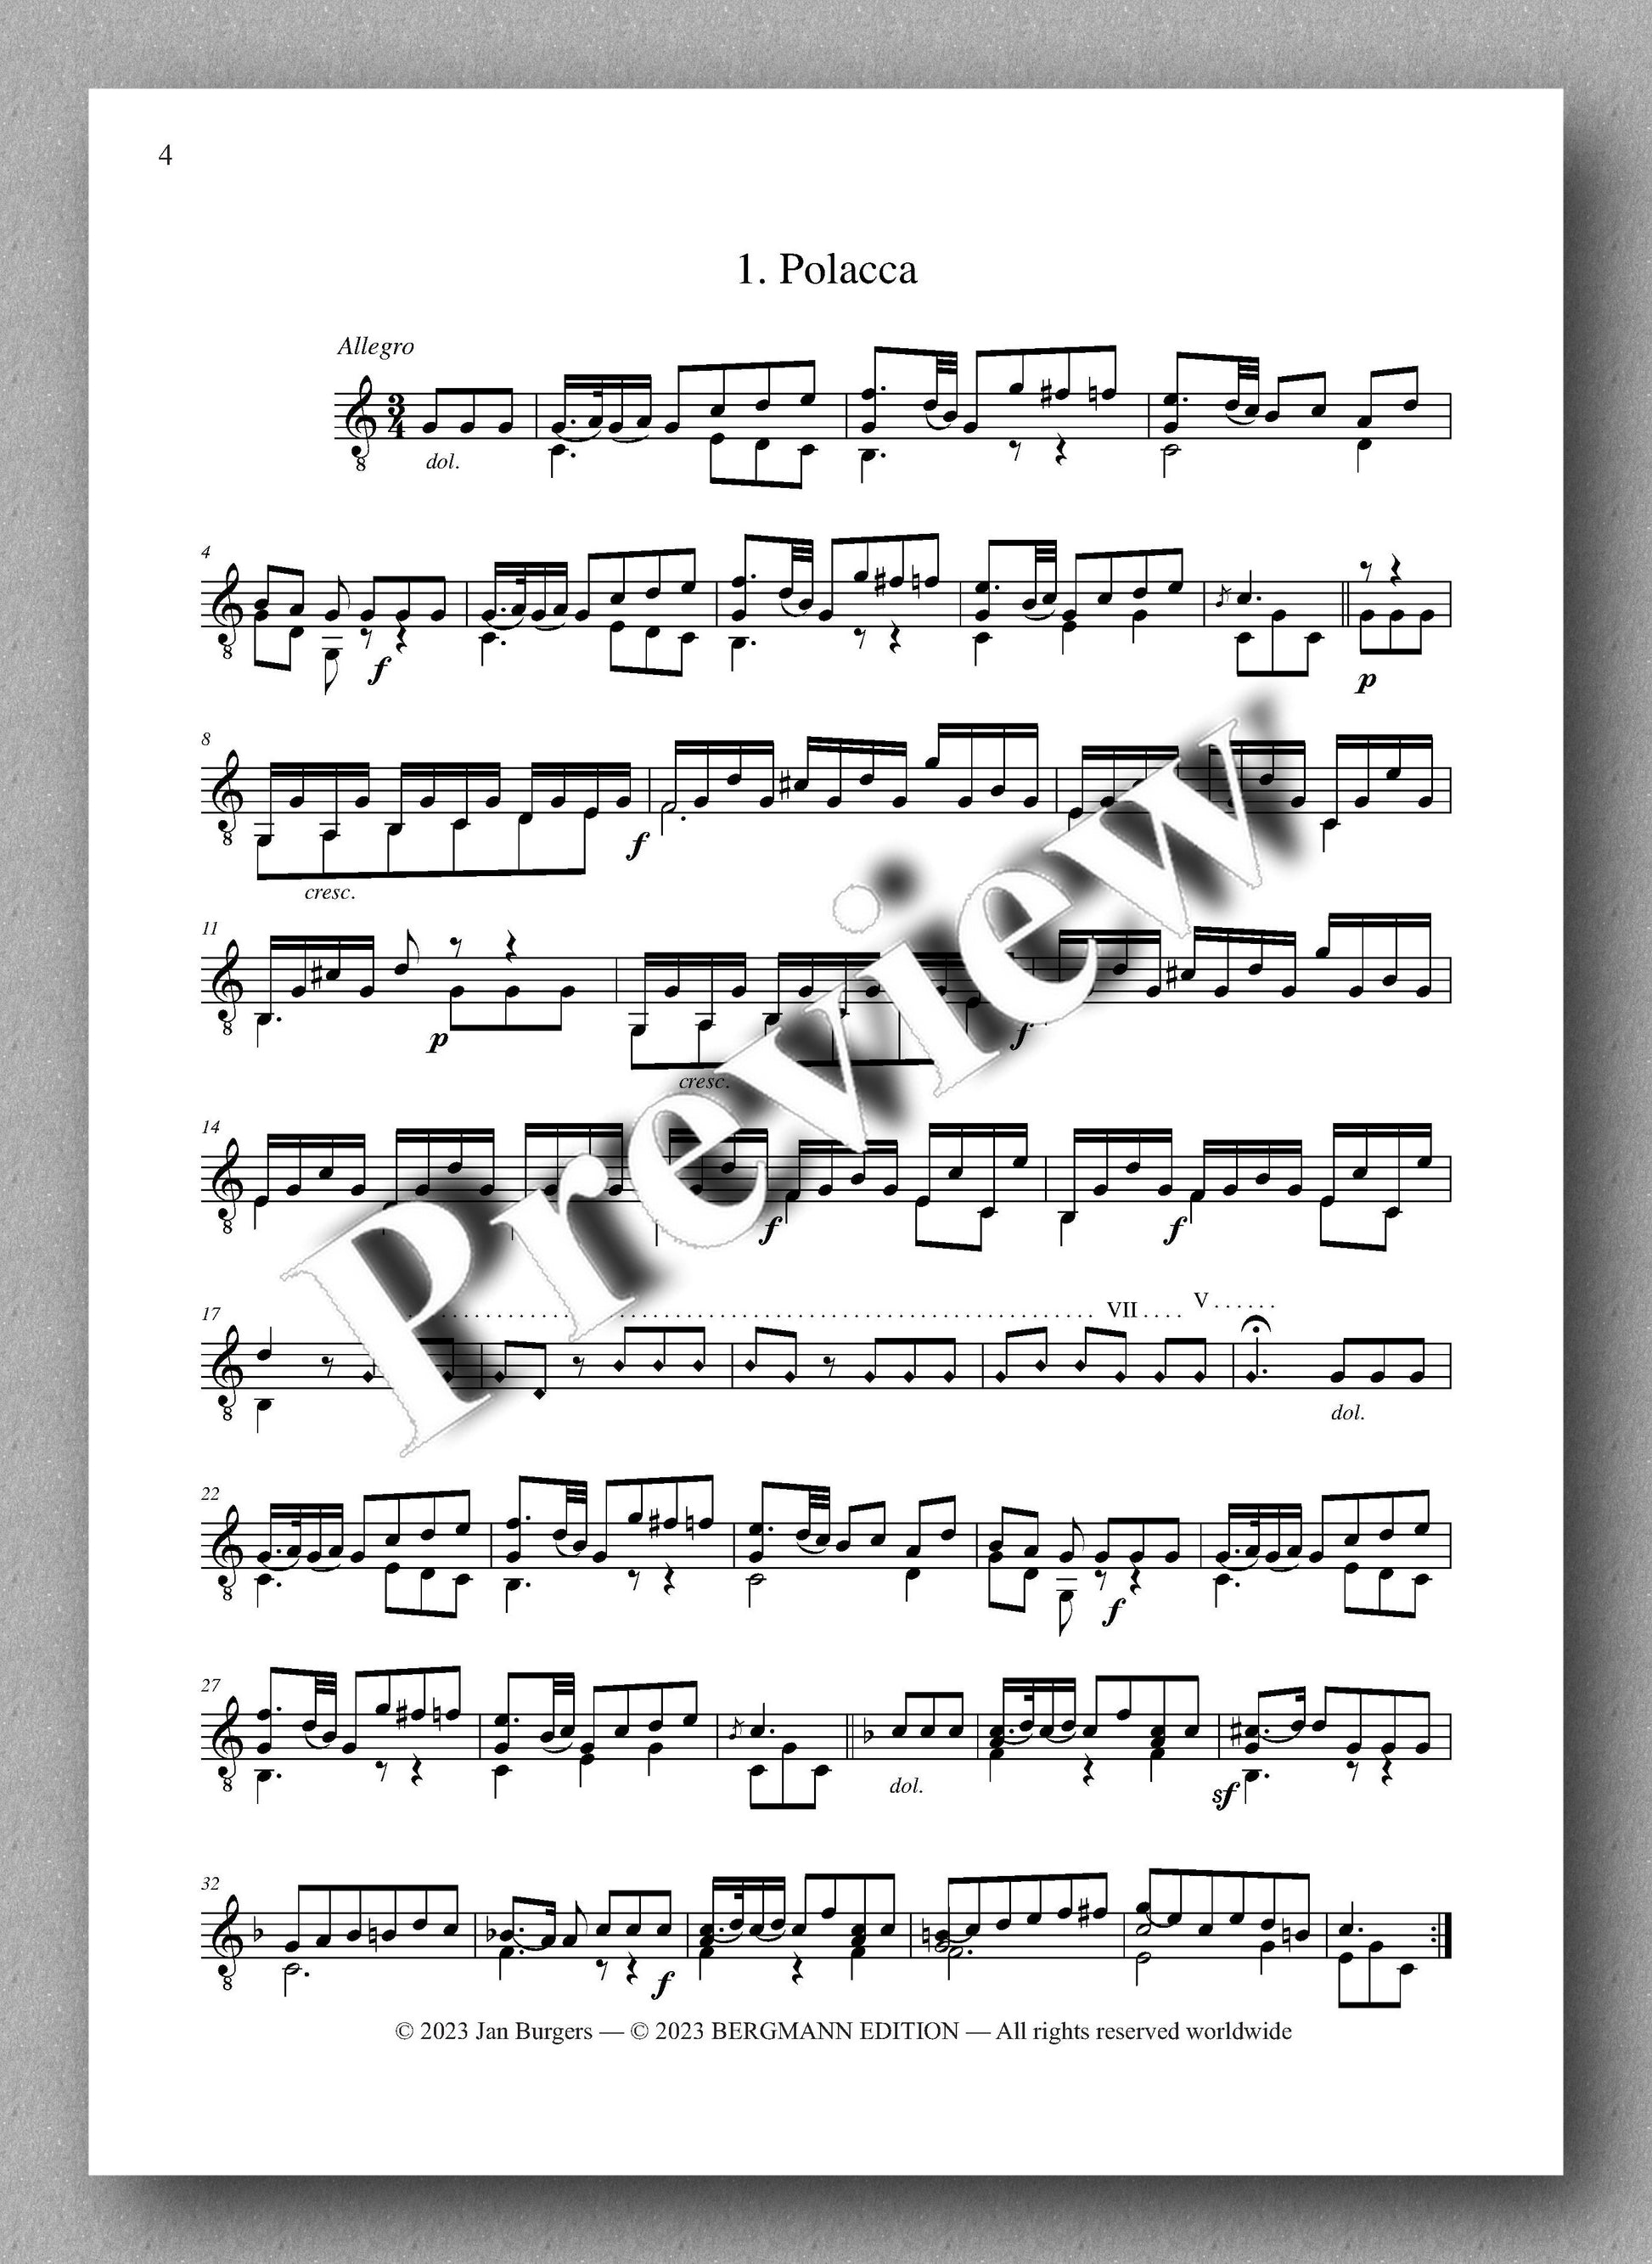 Molino, Collected Works for Guitar Solo, Vol. 31 - preview of the music score 1